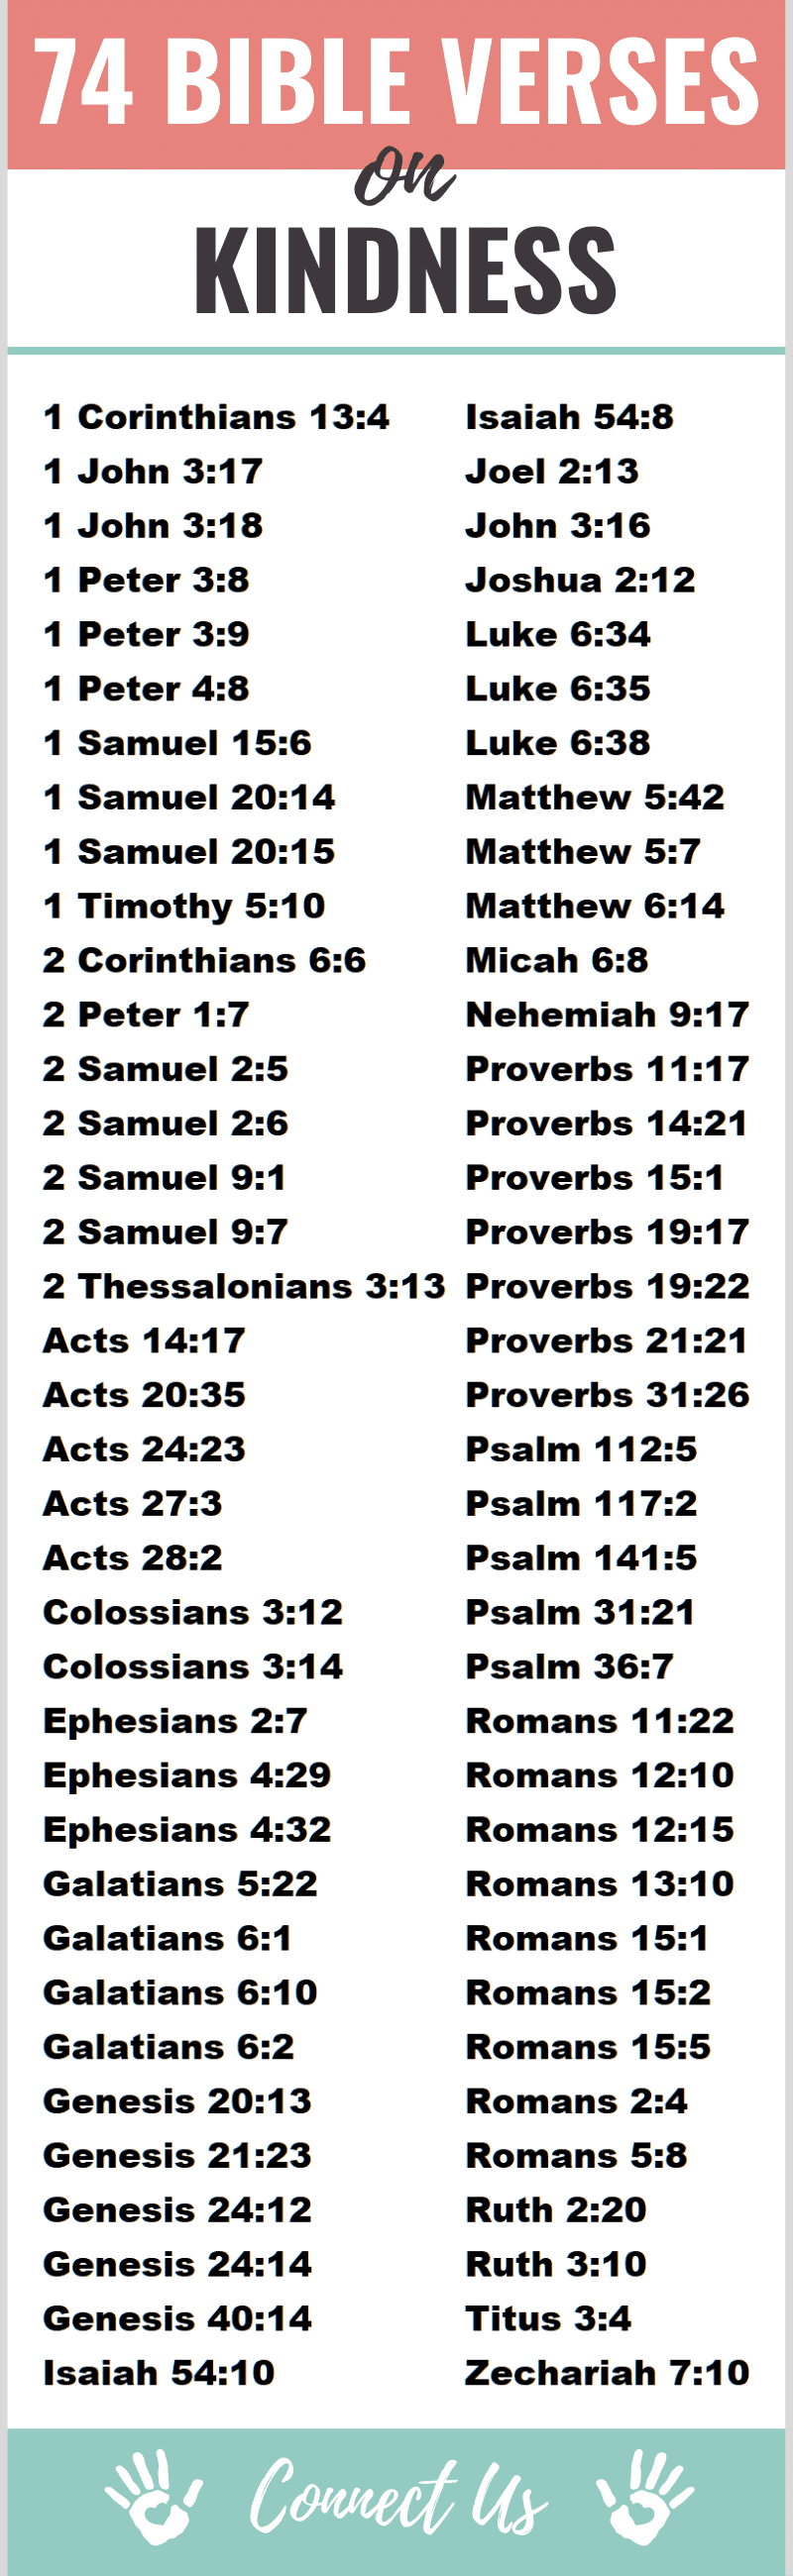 Bible Verses on Kindness